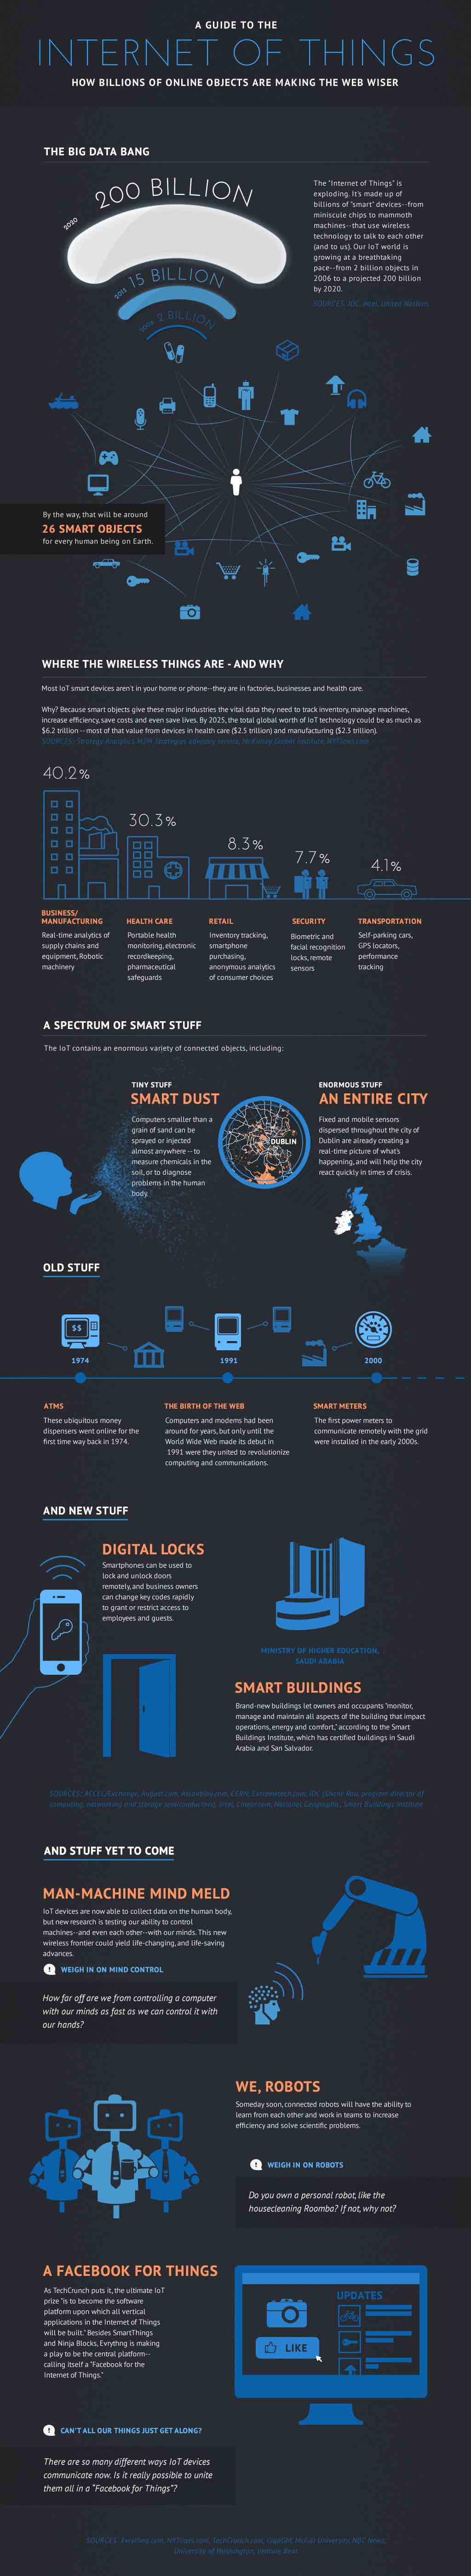 guide-to-iot-infographic